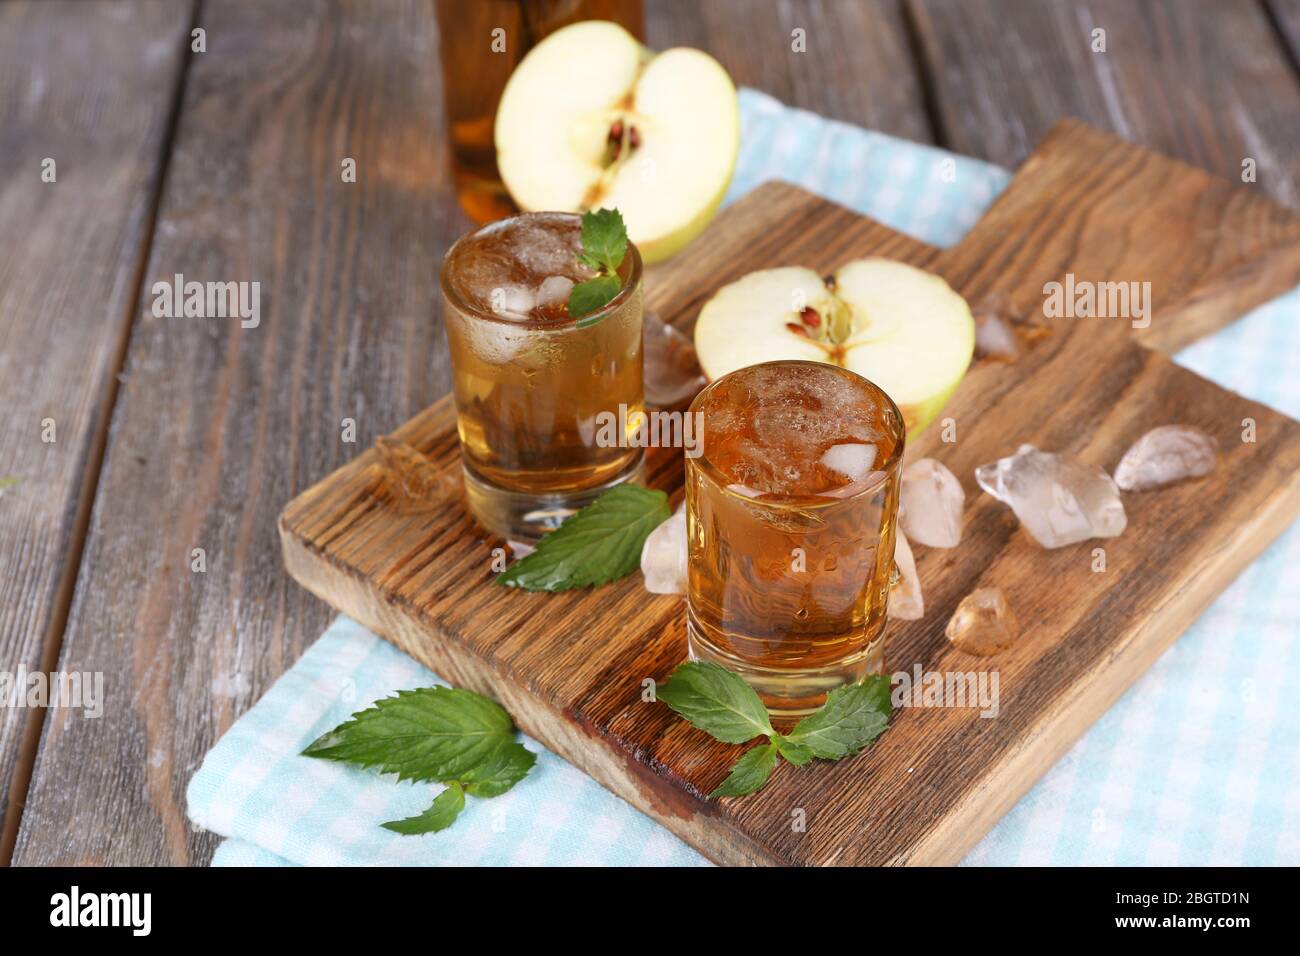 Still life with tasty apple cider in barrel and fresh apples Stock Photo